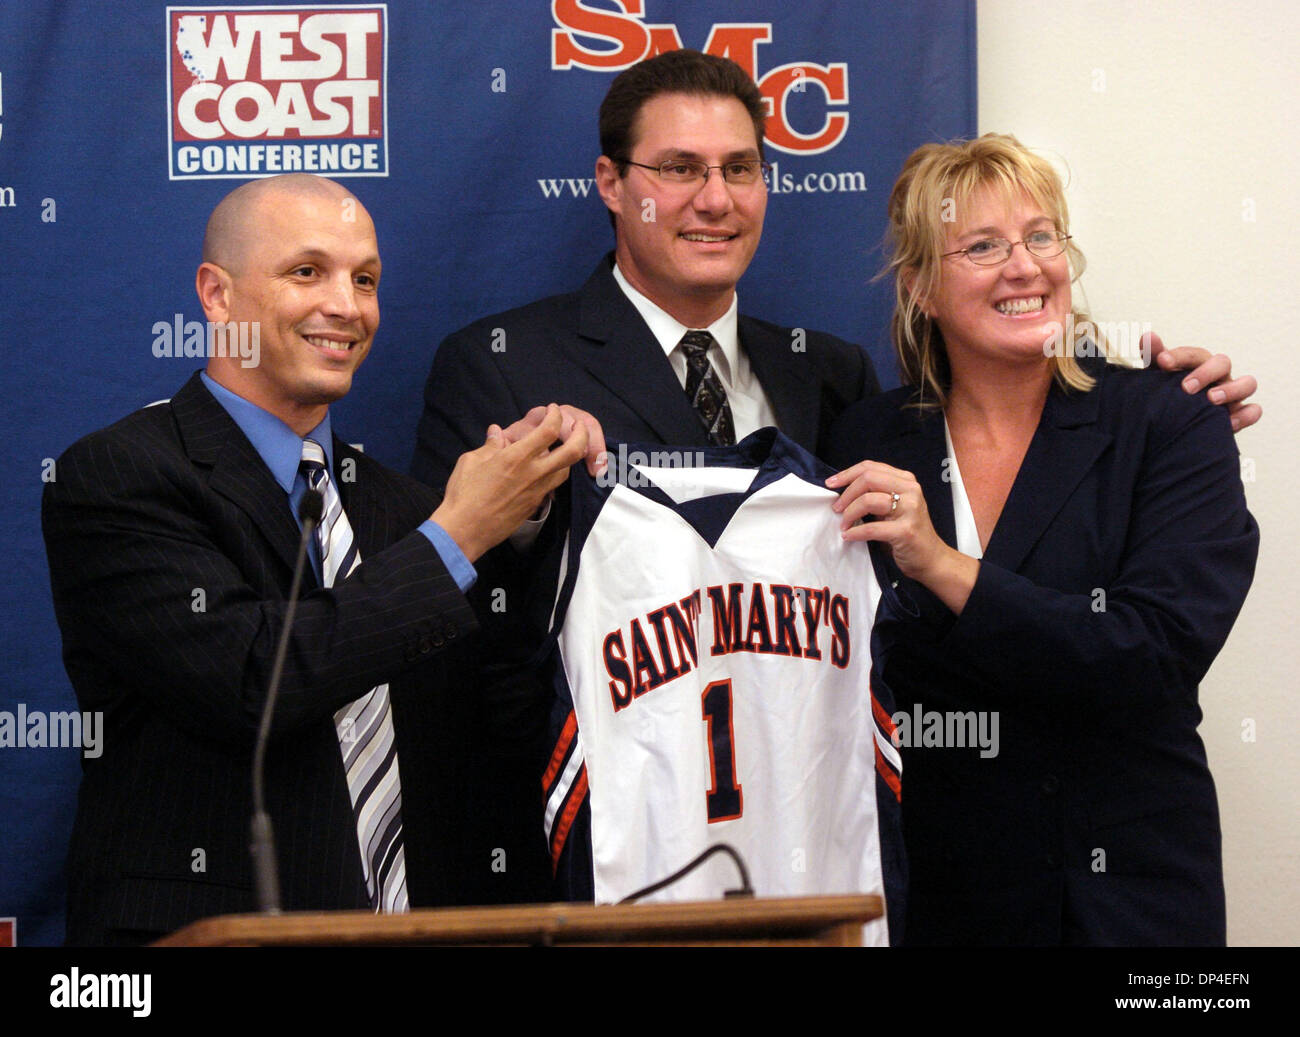 Aug 09, 2006; Moraga, CA, USA; New women's basketball coach PAUL THOMAS poses with director of athletics MARK ORR, and his wife SUE ELLEN THOMAS at the conclusion of a press conference at St. Mary's College.  Paul Thomas, who led the Cal Poly women's basketball team to two national championships and 235 wins over a 12-year period, has resigned his position to become head coach at D Stock Photo